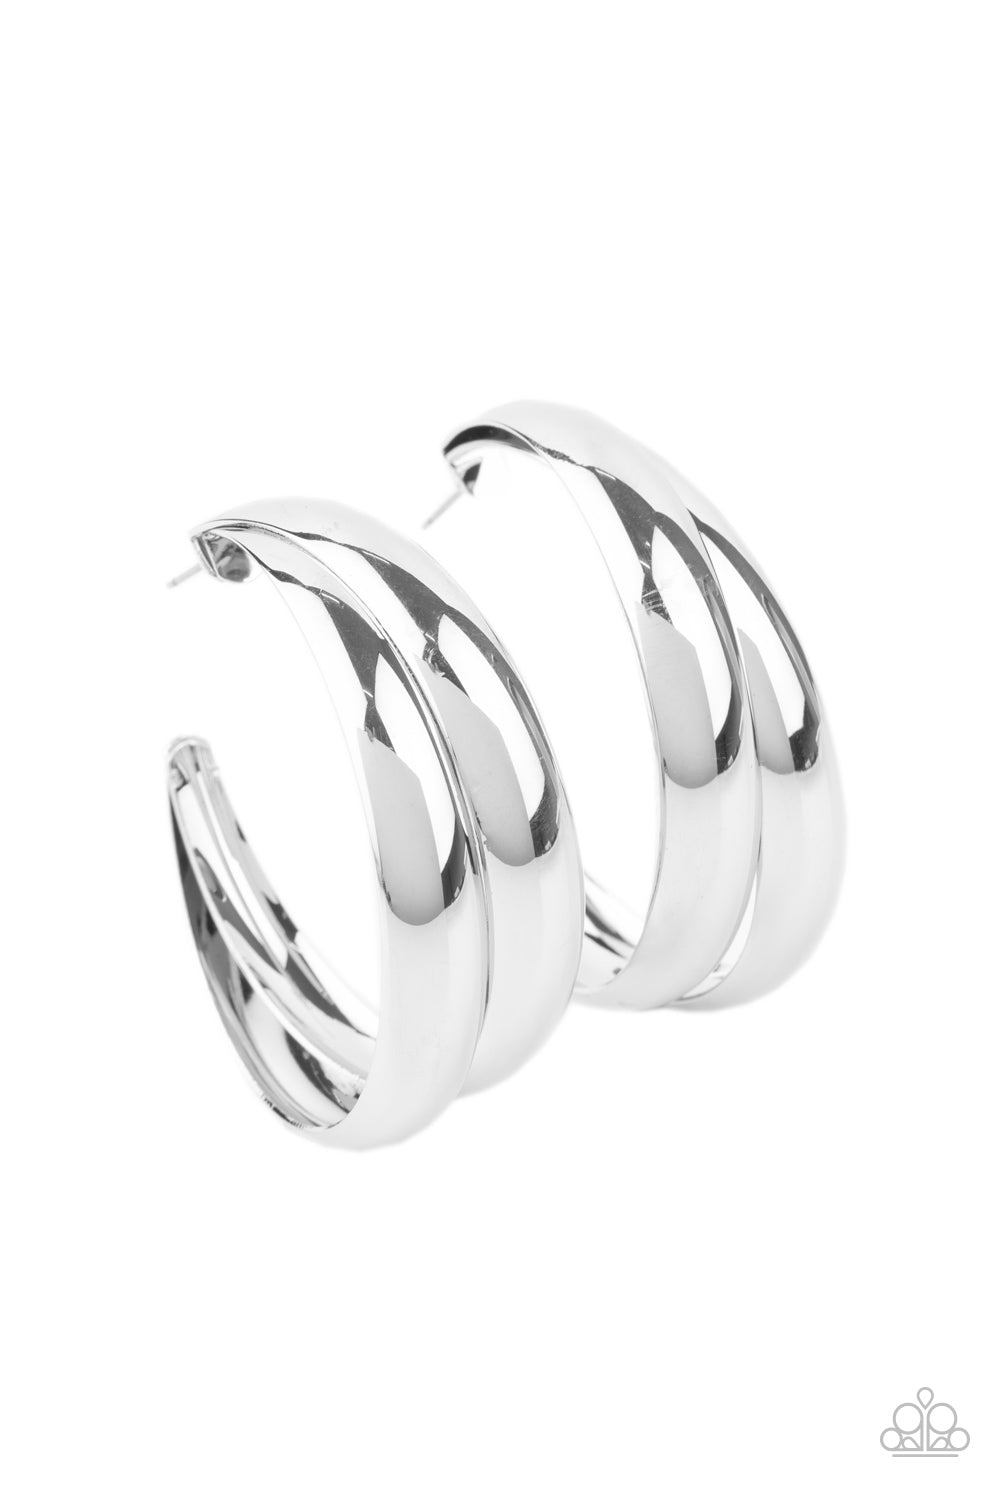 Paparazzi Colossal Curves - Silver - Hoop Post Earrings - $5 Jewelry with Ashley Swint